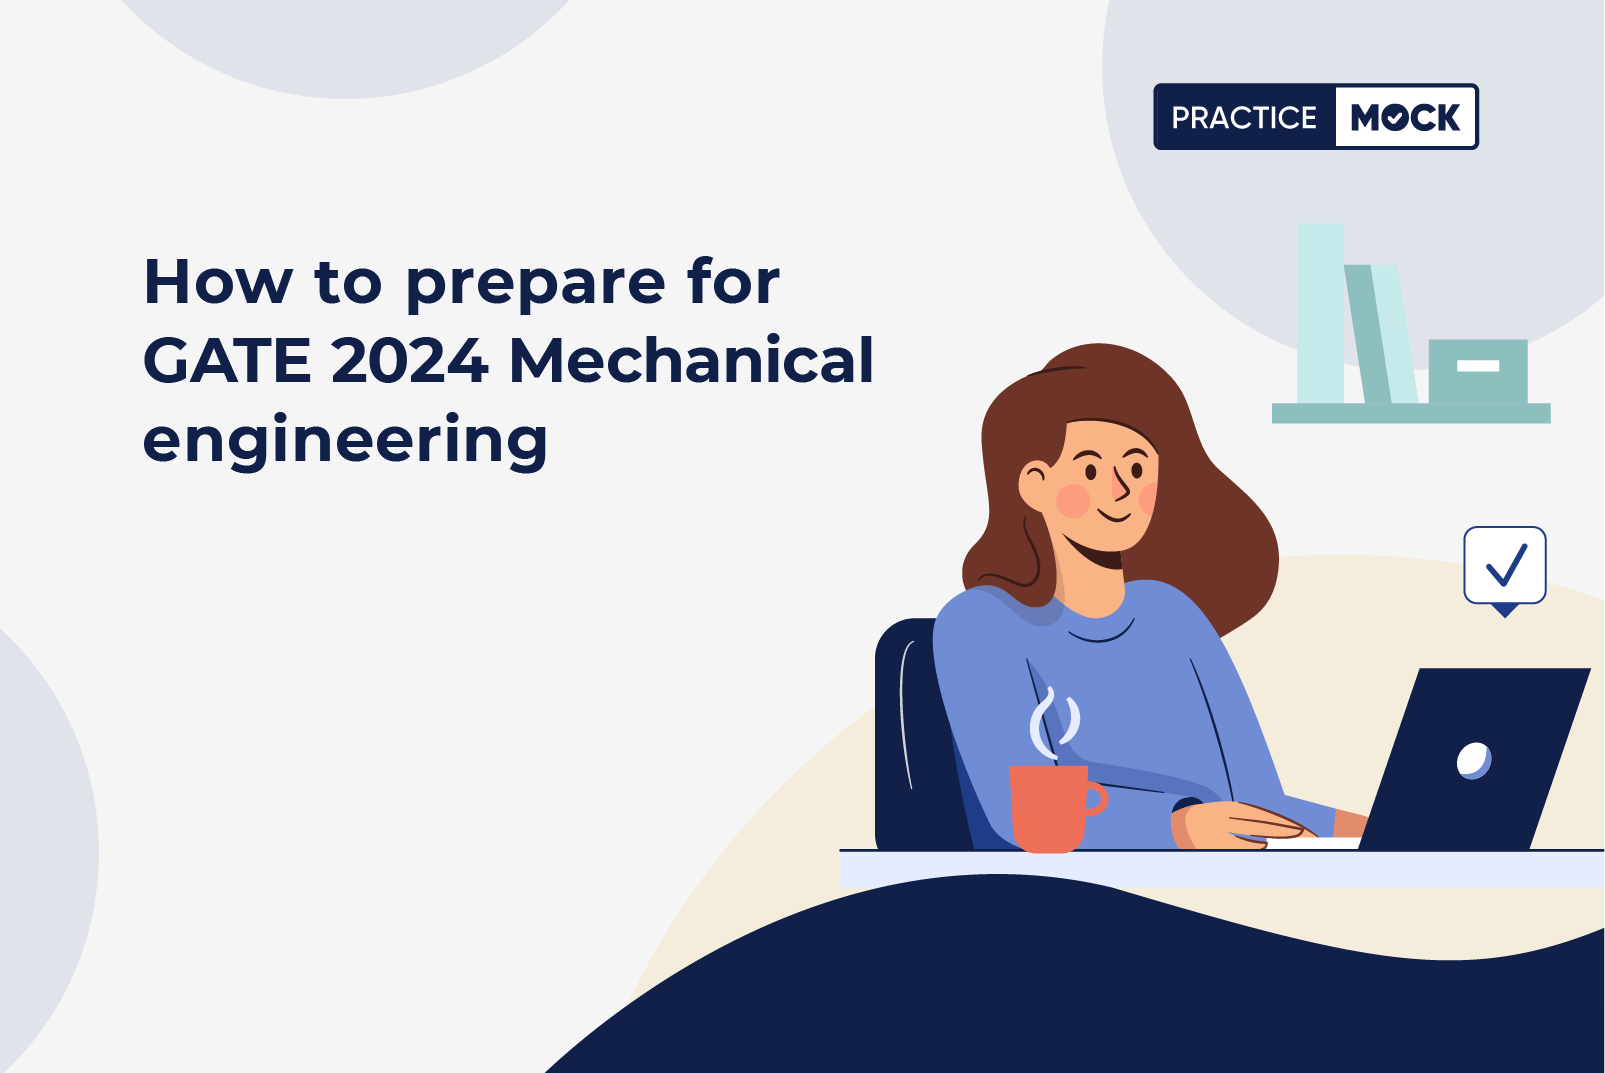 How to prepare for GATE 2024 Mechanical Engineering? PracticeMock